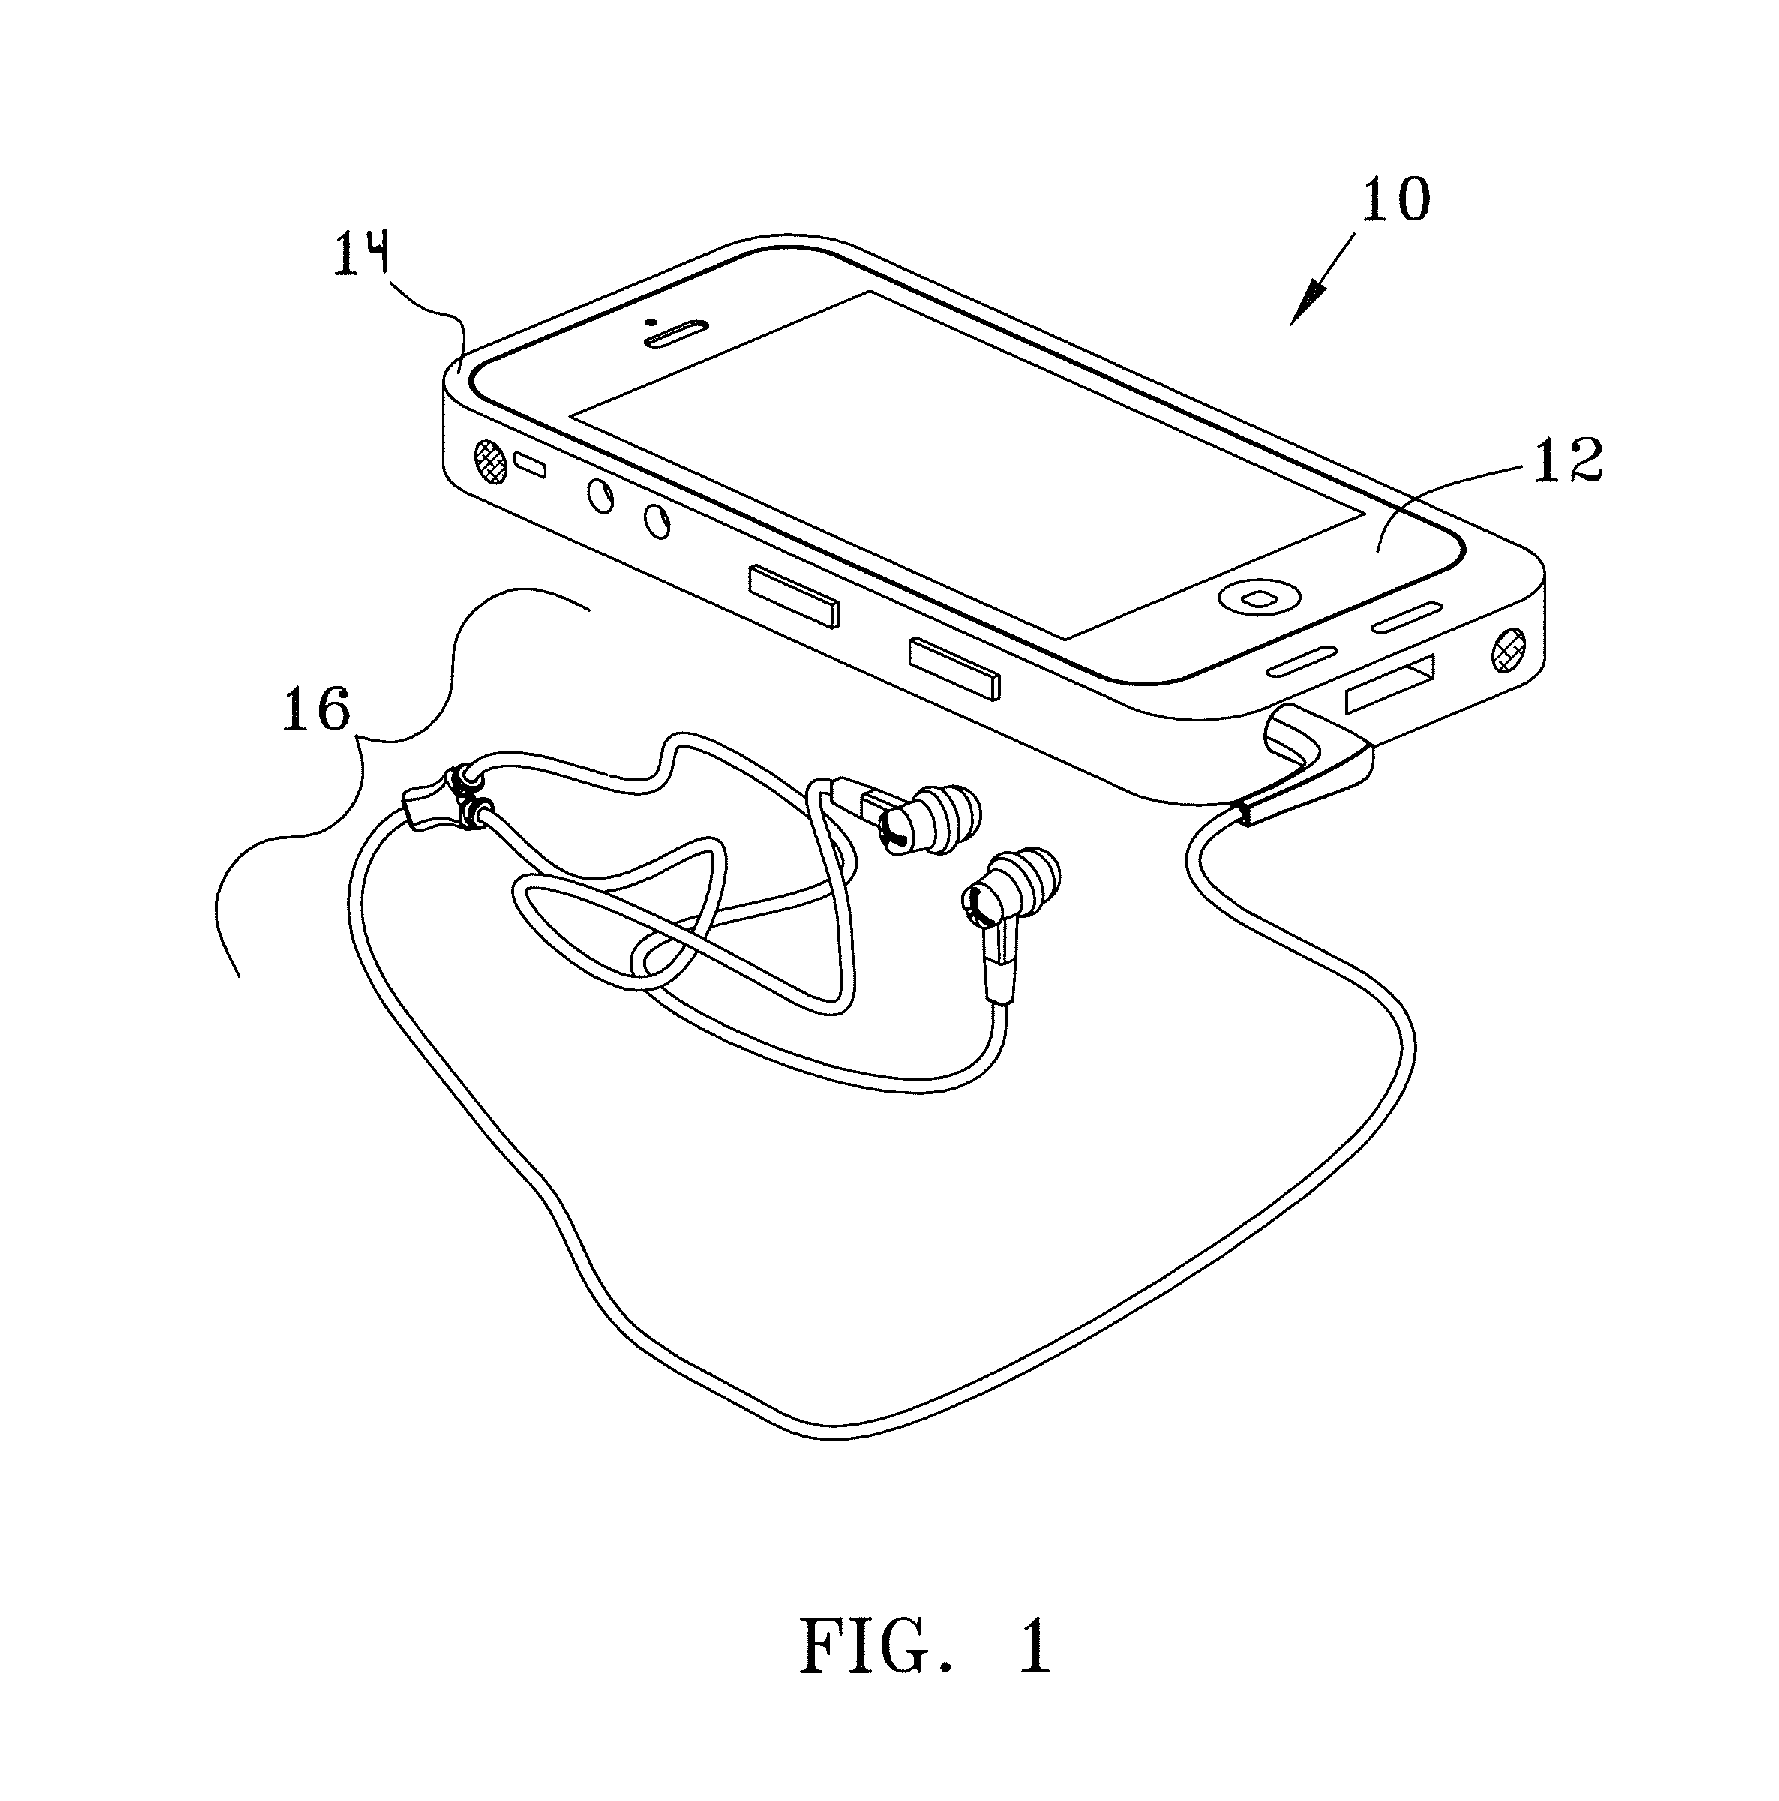 Portable binaural recording and playback accessory for a multimedia device